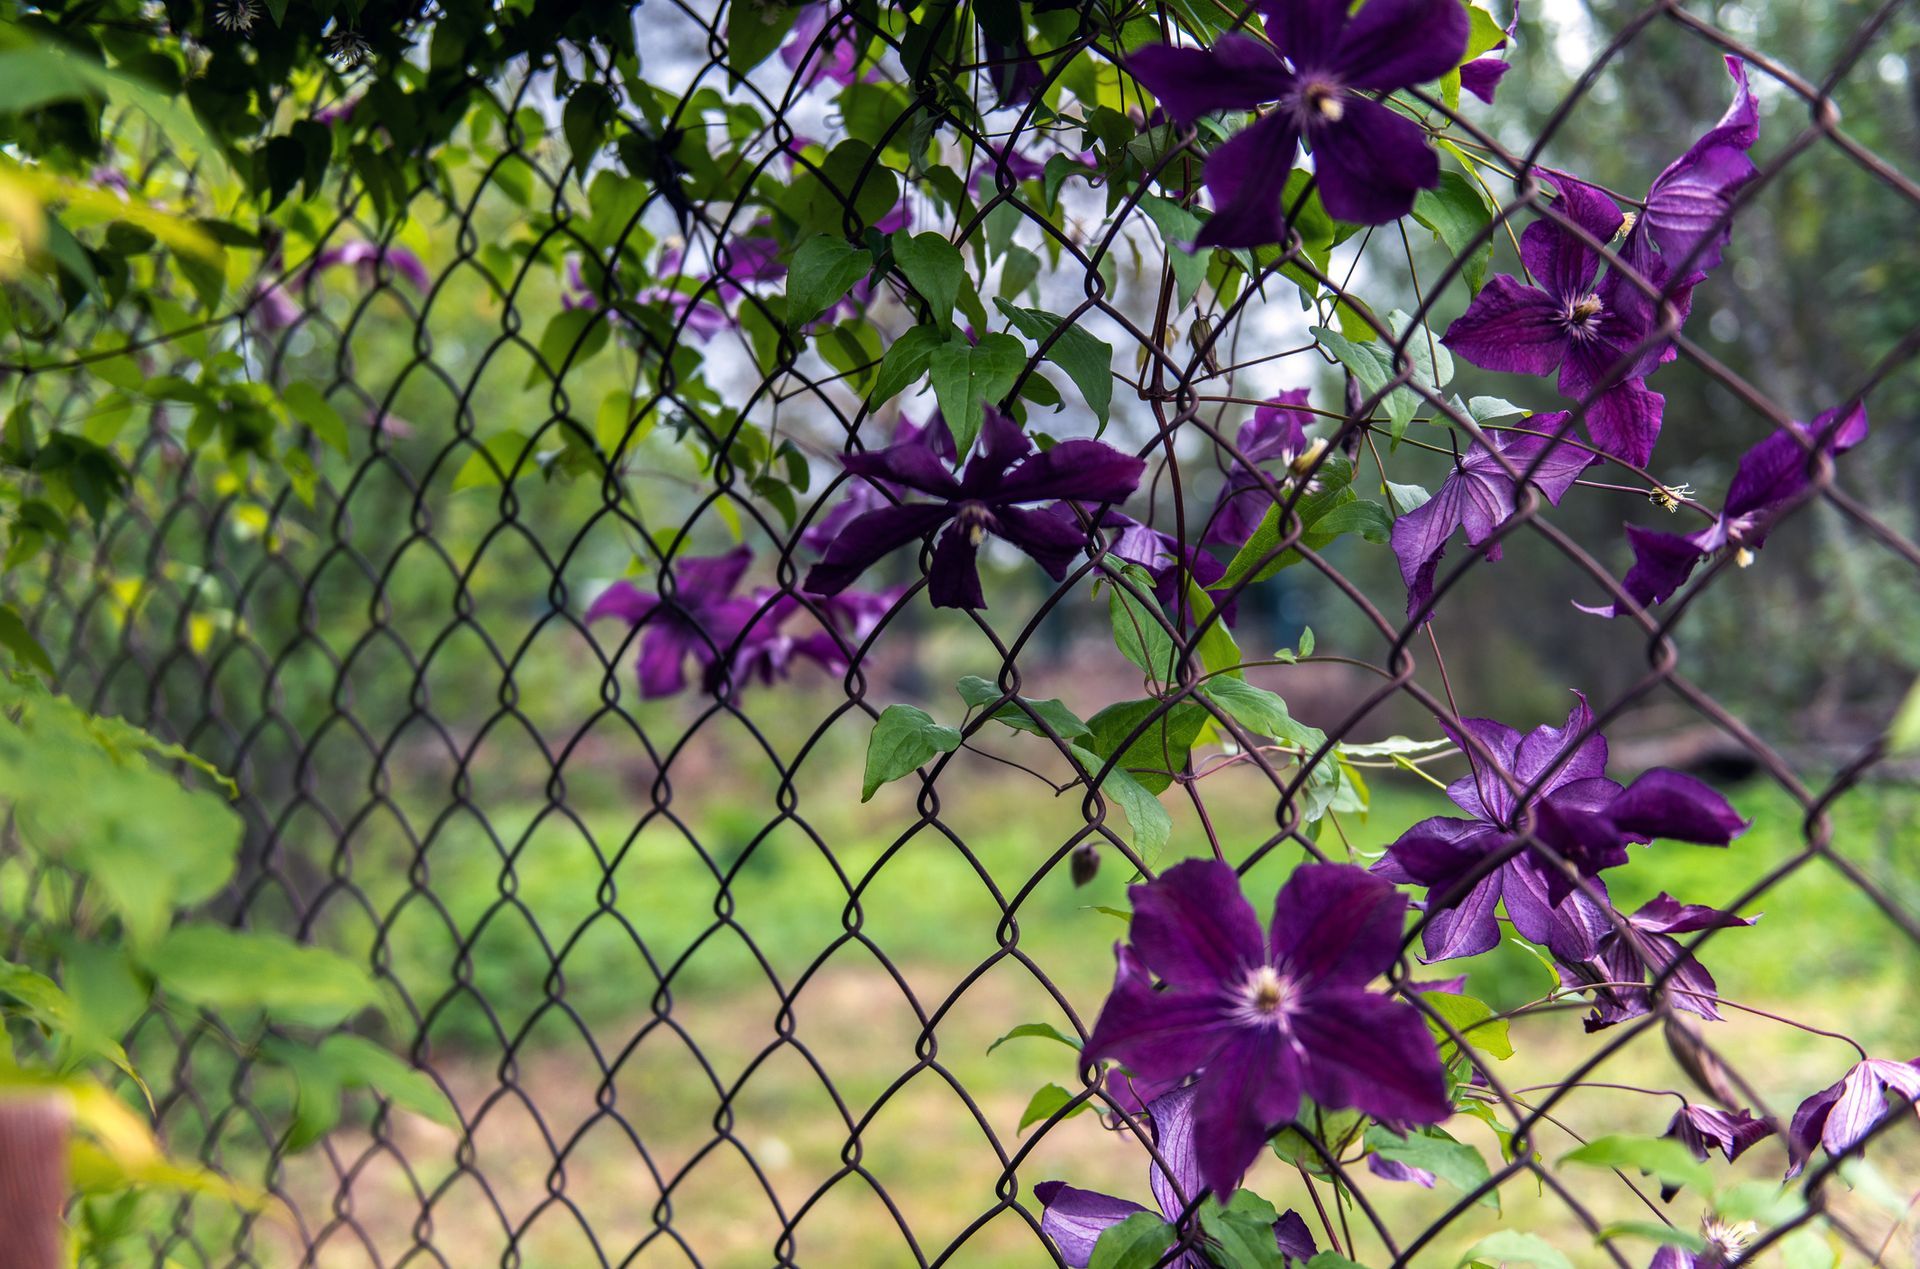 purple flowers are growing on a chain link fence .